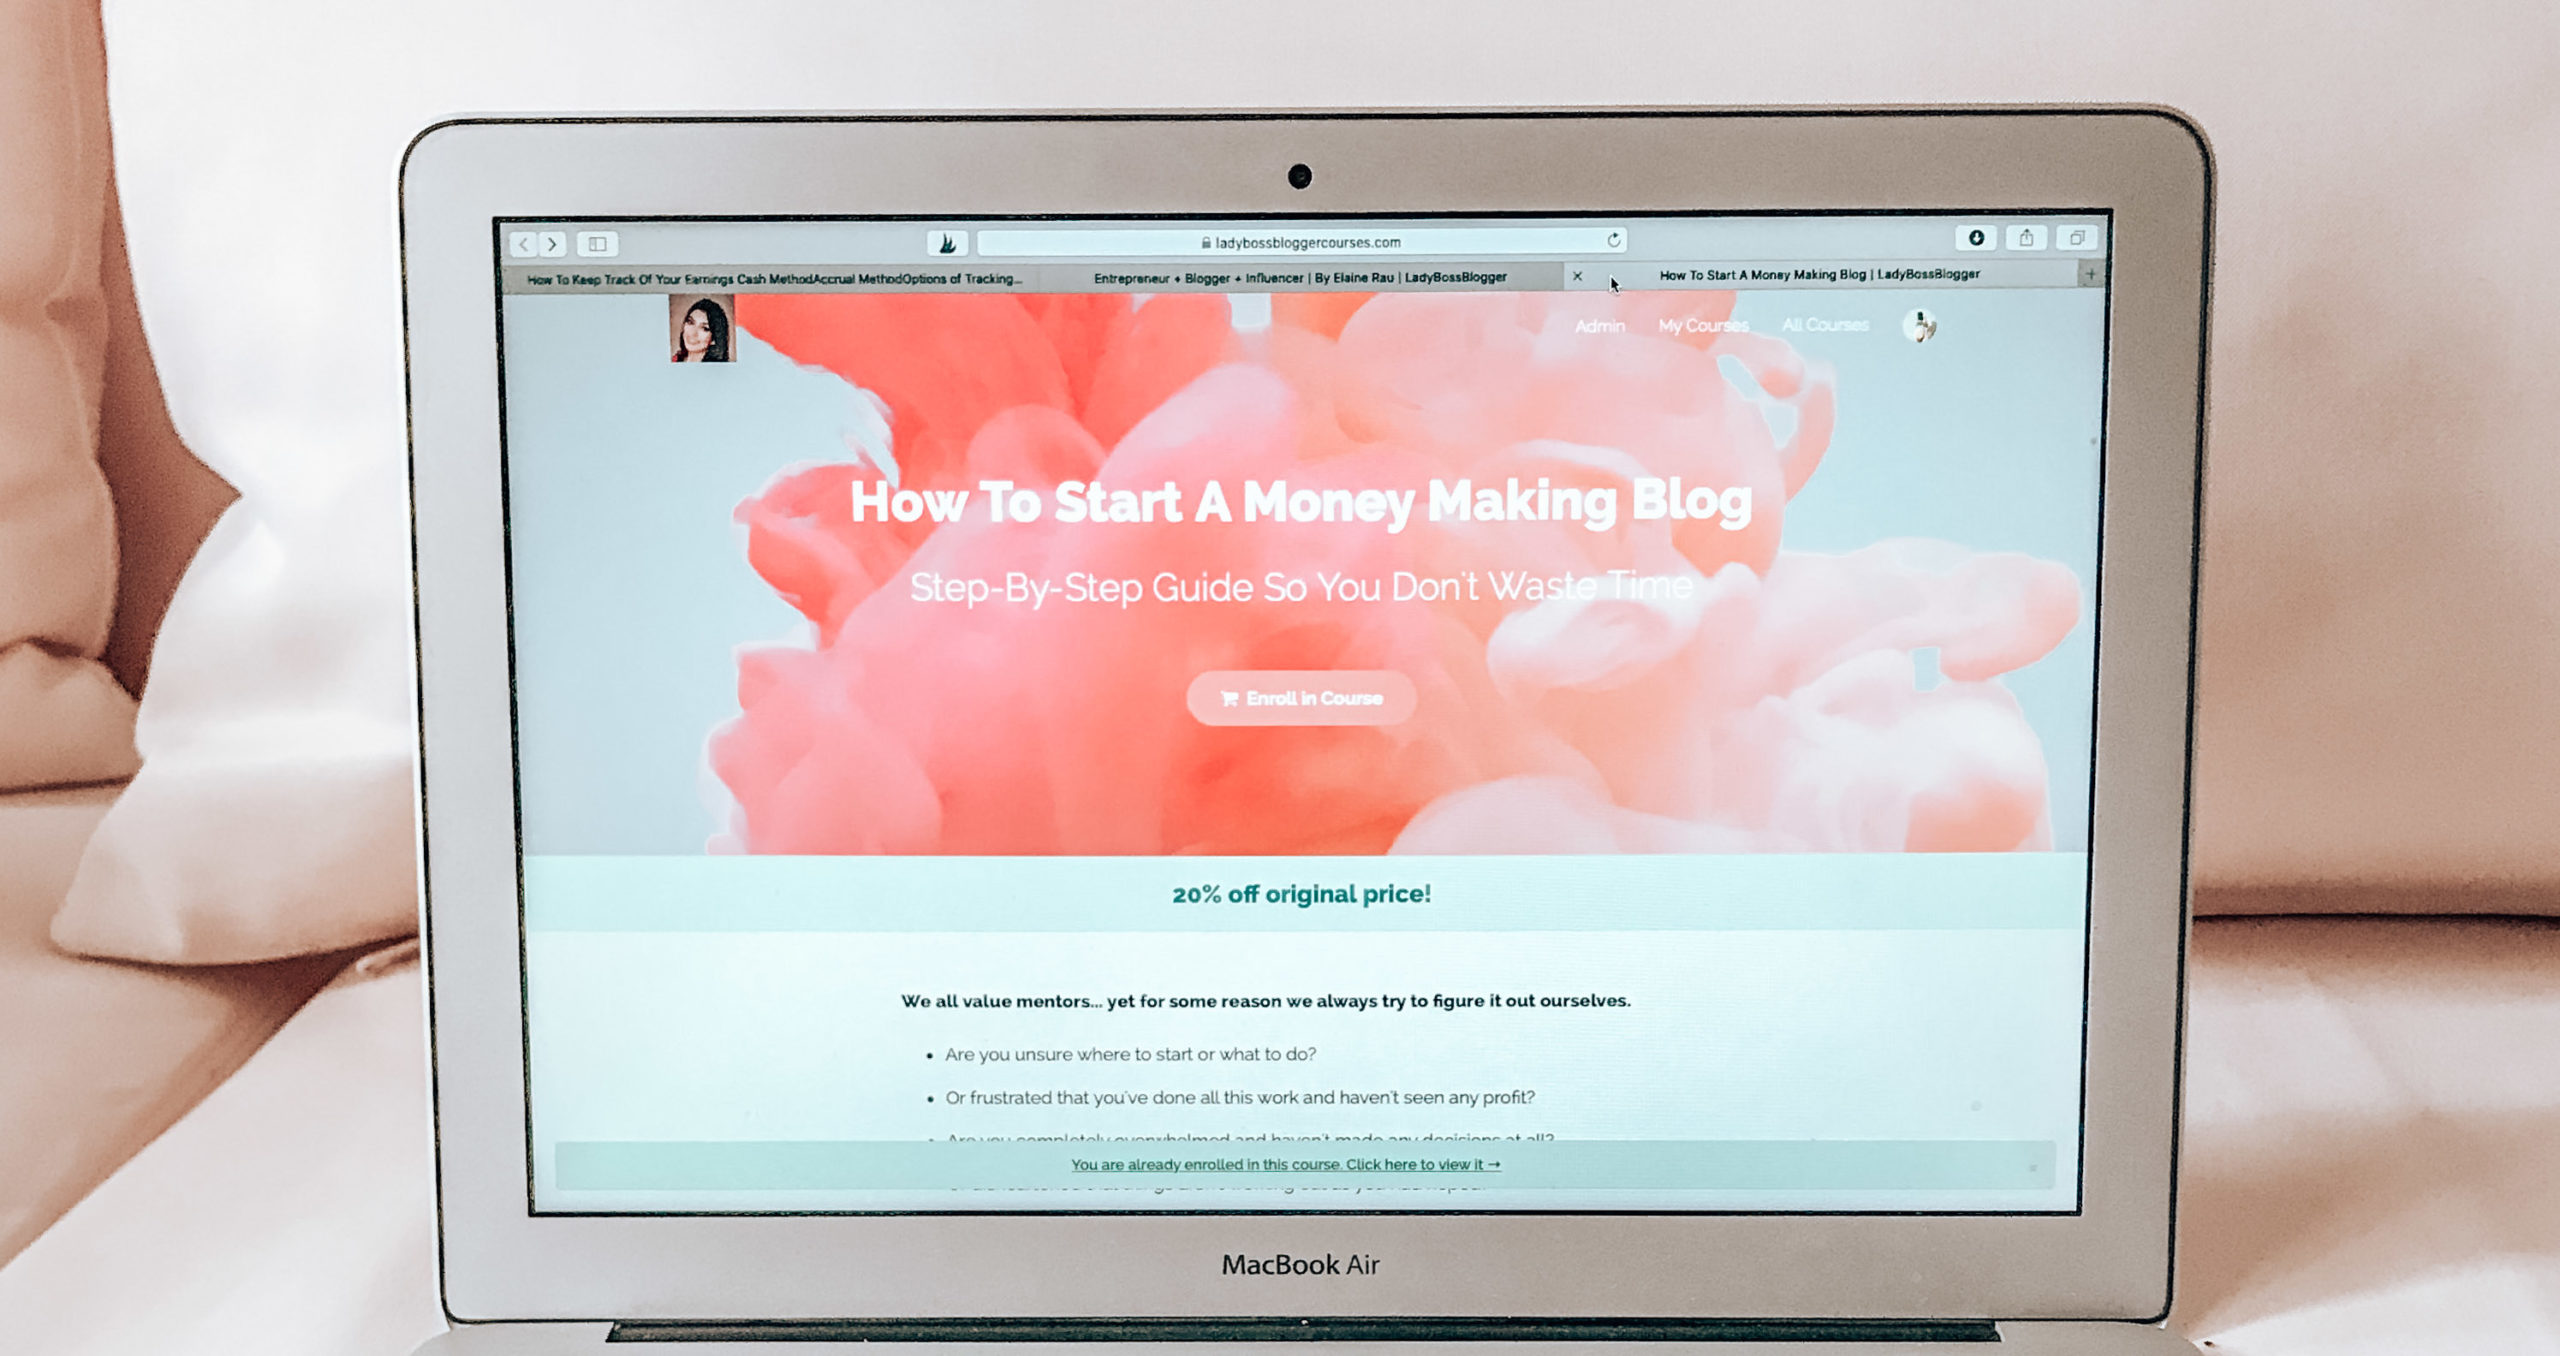 My Blog Traffic Increased 352% After Taking LadyBossBlogger's Course